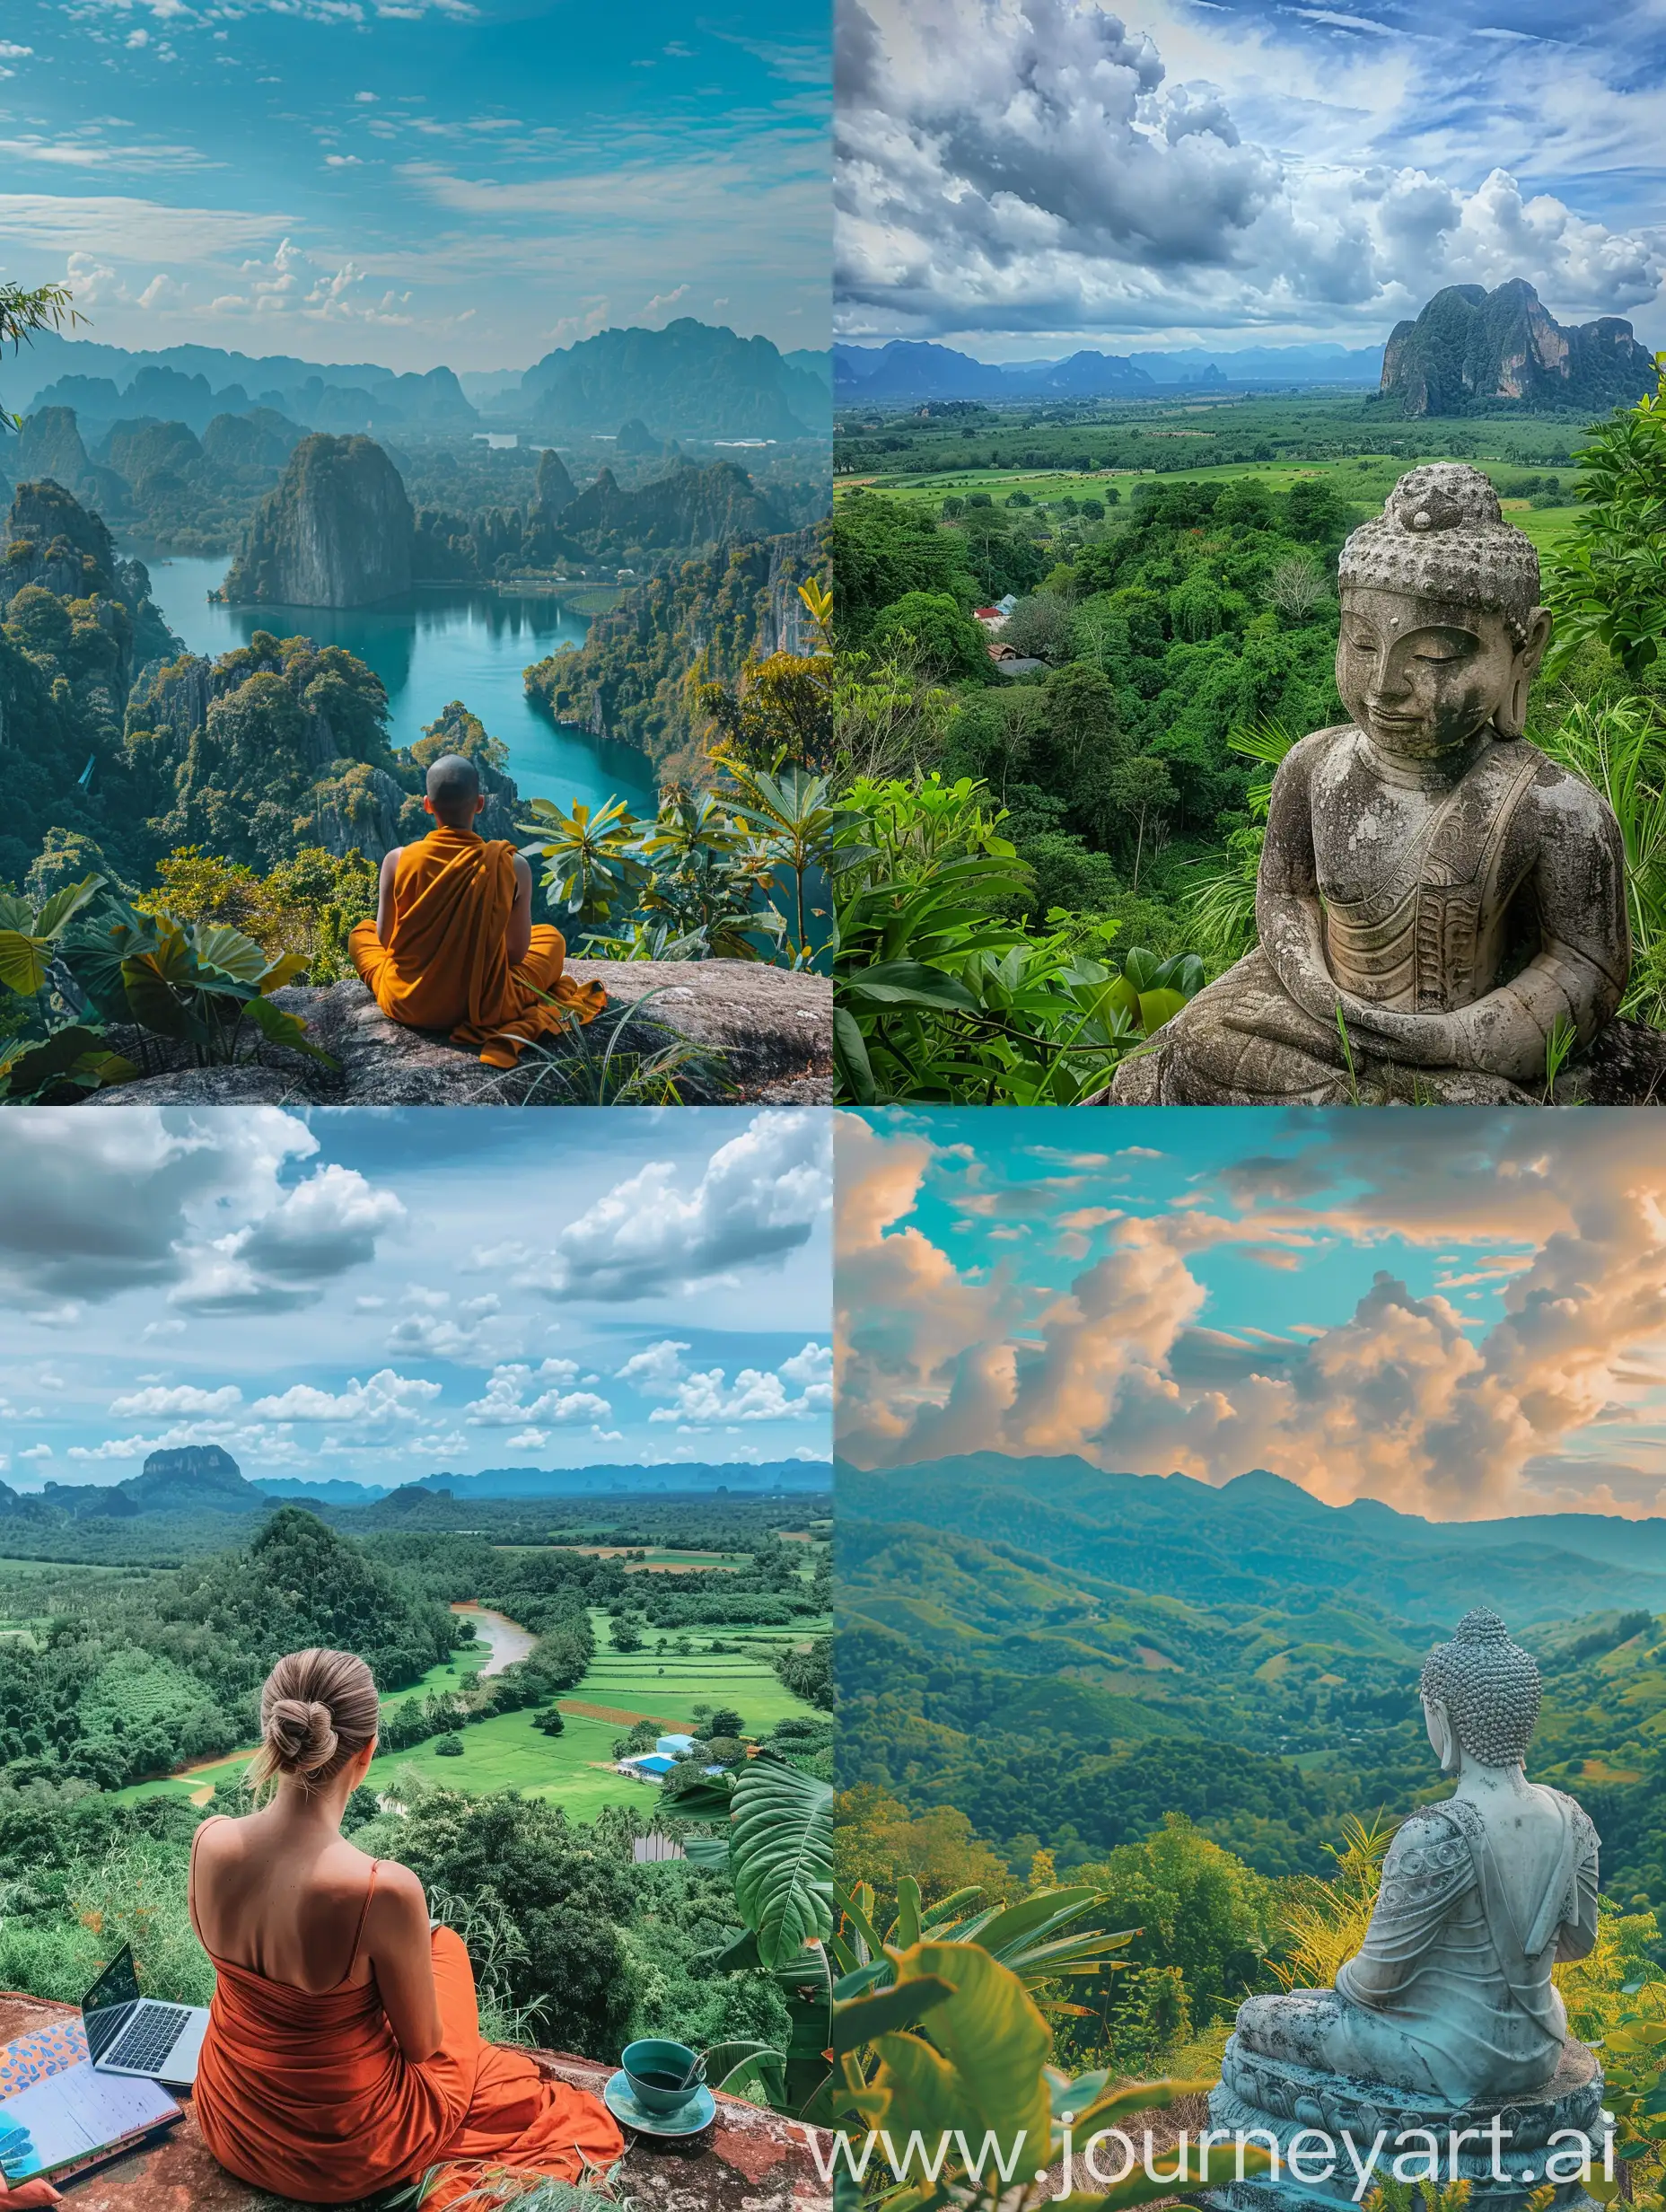 Please generate the front cover image of a Linkedin article titled "Oh My Buddha: reflections on digital nomadism, it is set in Thailand, it should be about working remotely from a lush nature landscape. IT is my field of work.